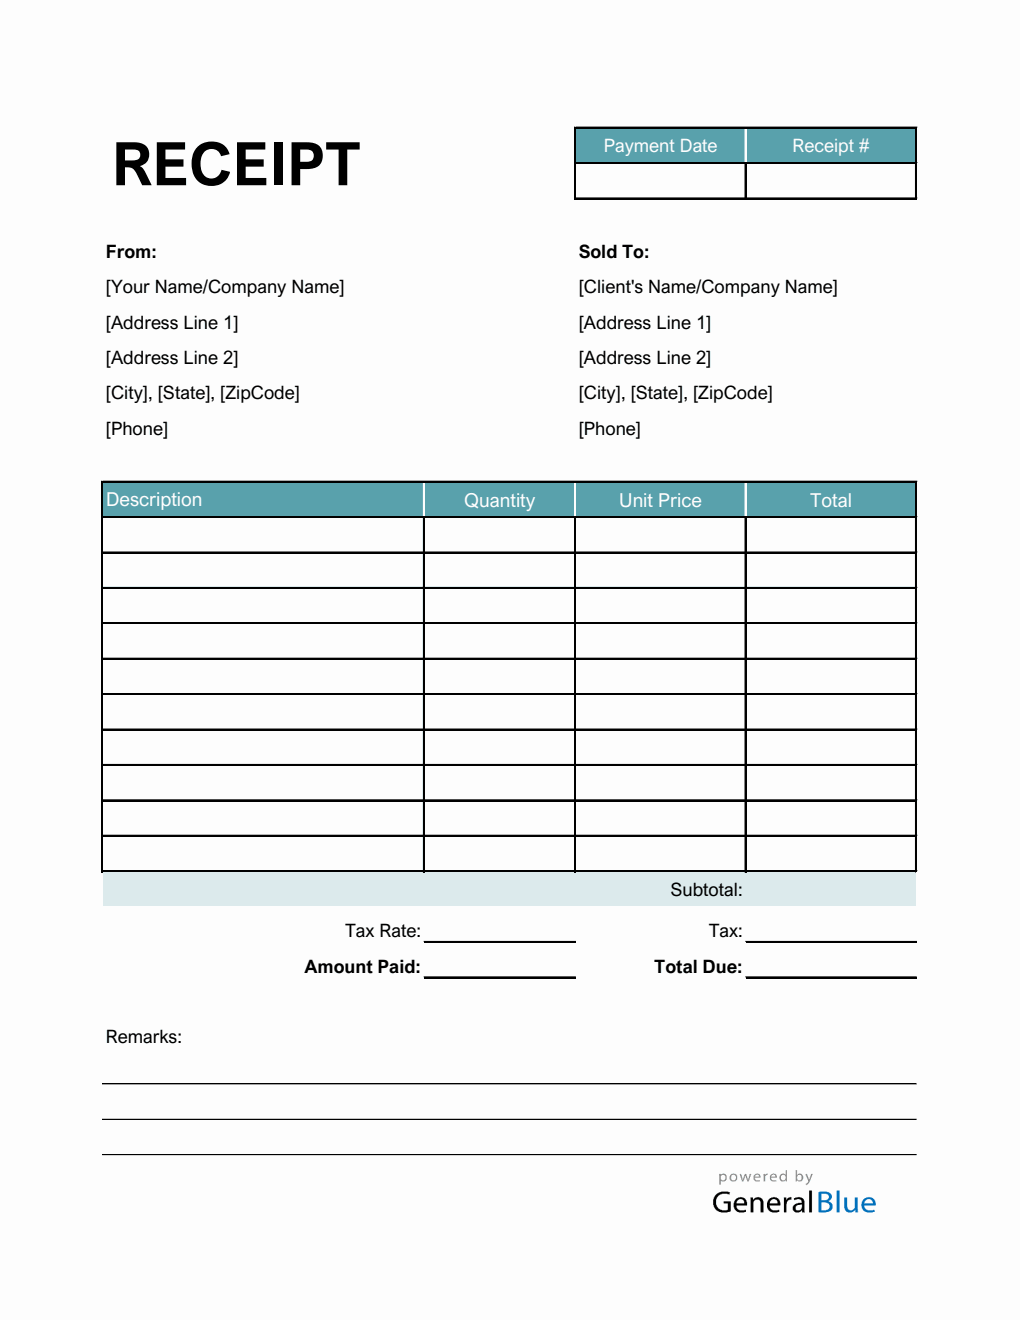 Printable Receipt Template in Excel (Basic)